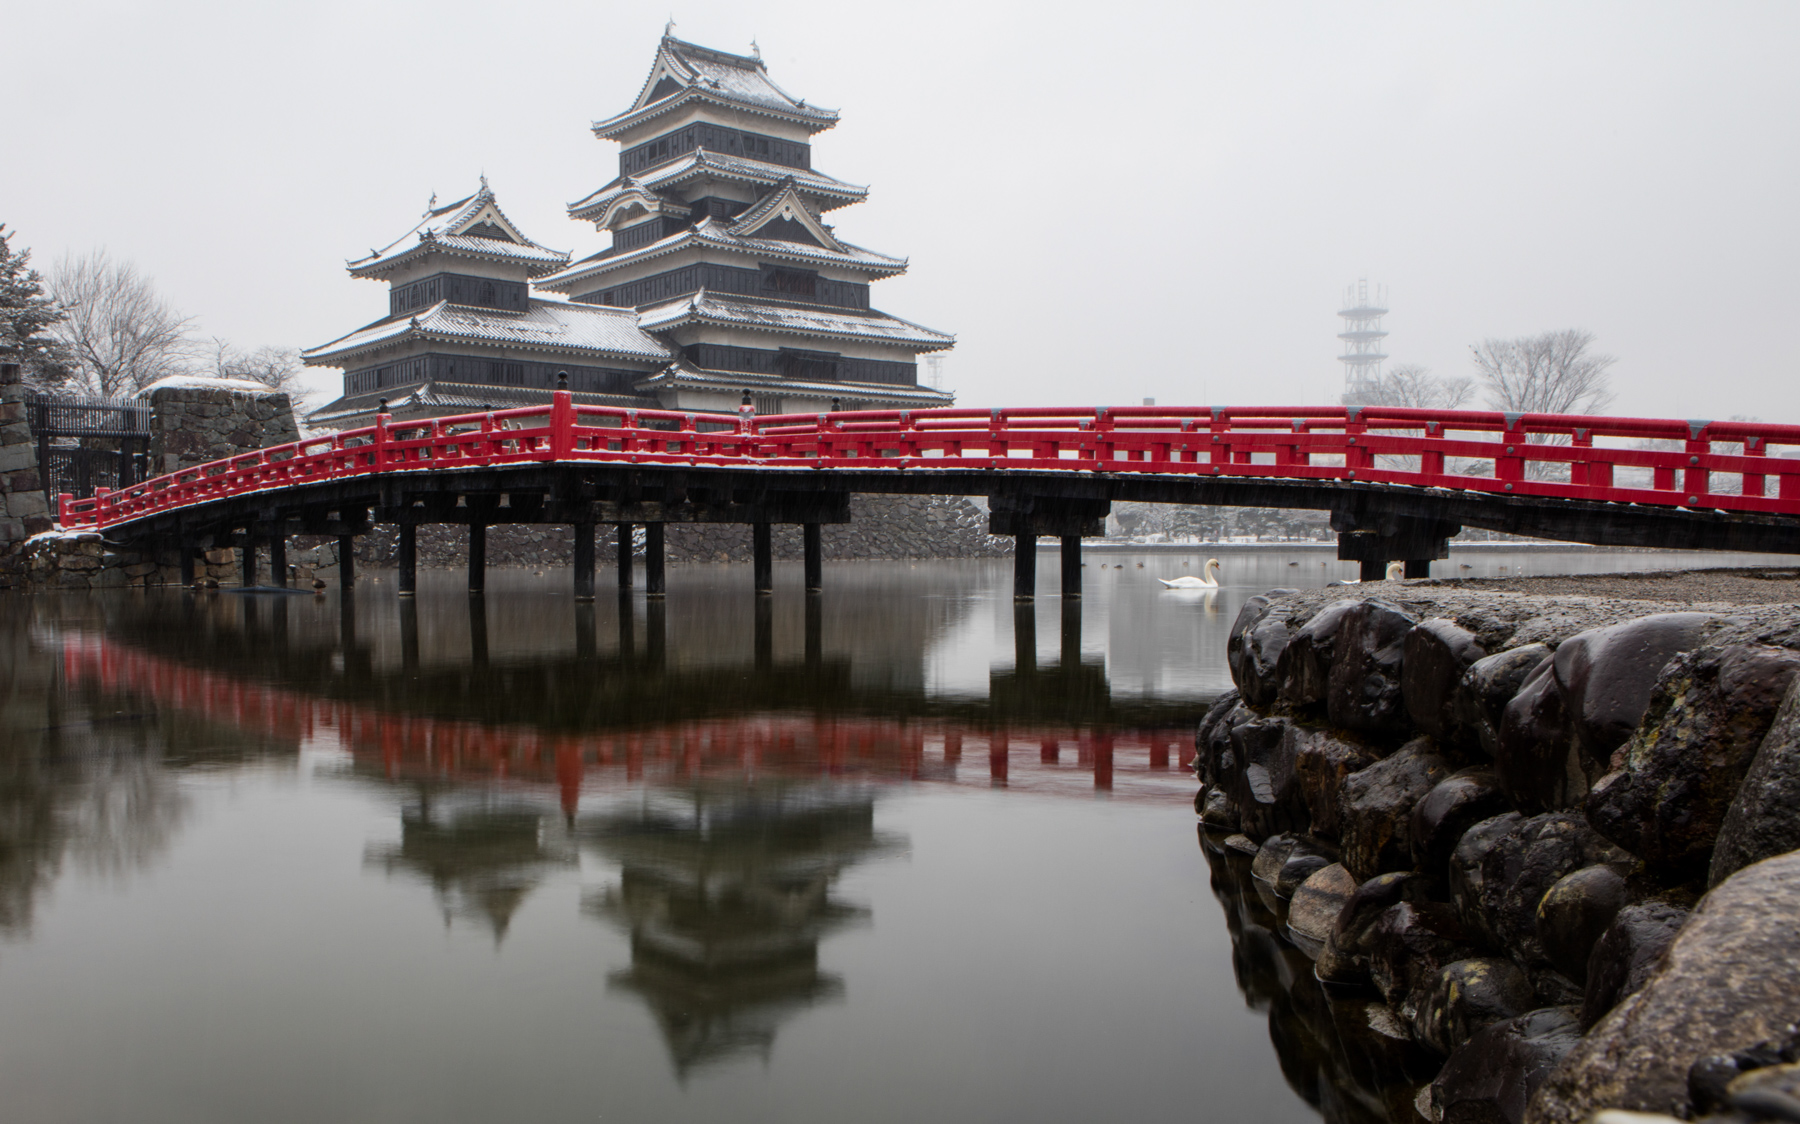 Matsumoto castle covered with snow and red bridge in front reflected in moat in Japan.